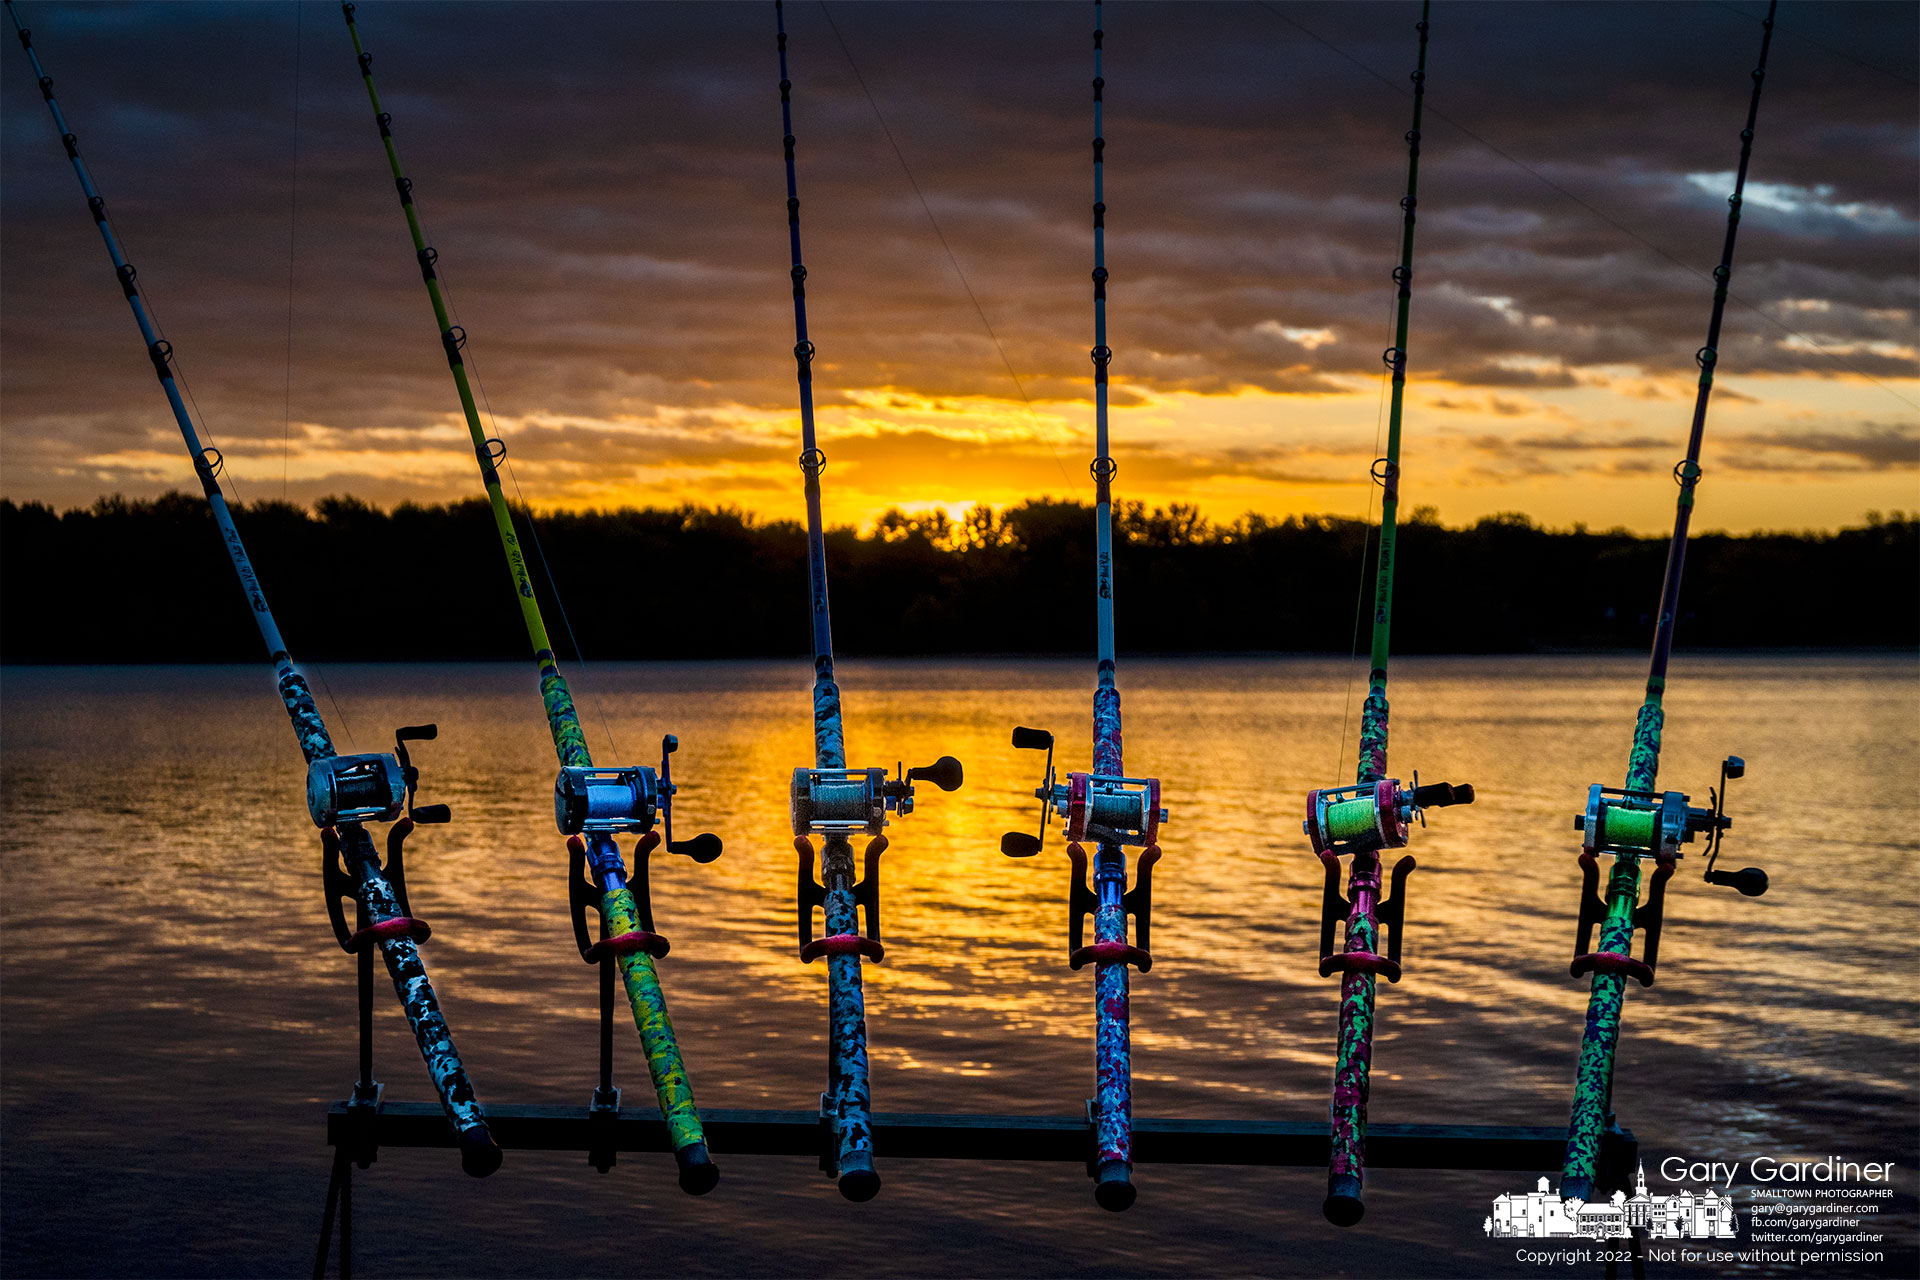 Six colorful rods and reels used by three fishermen sit in a homemade holding rack as their owners stand nearby and wait in the old, breezy morning at sunrise over Hoover Reservoir. My Final Photo for October 15, 2022,